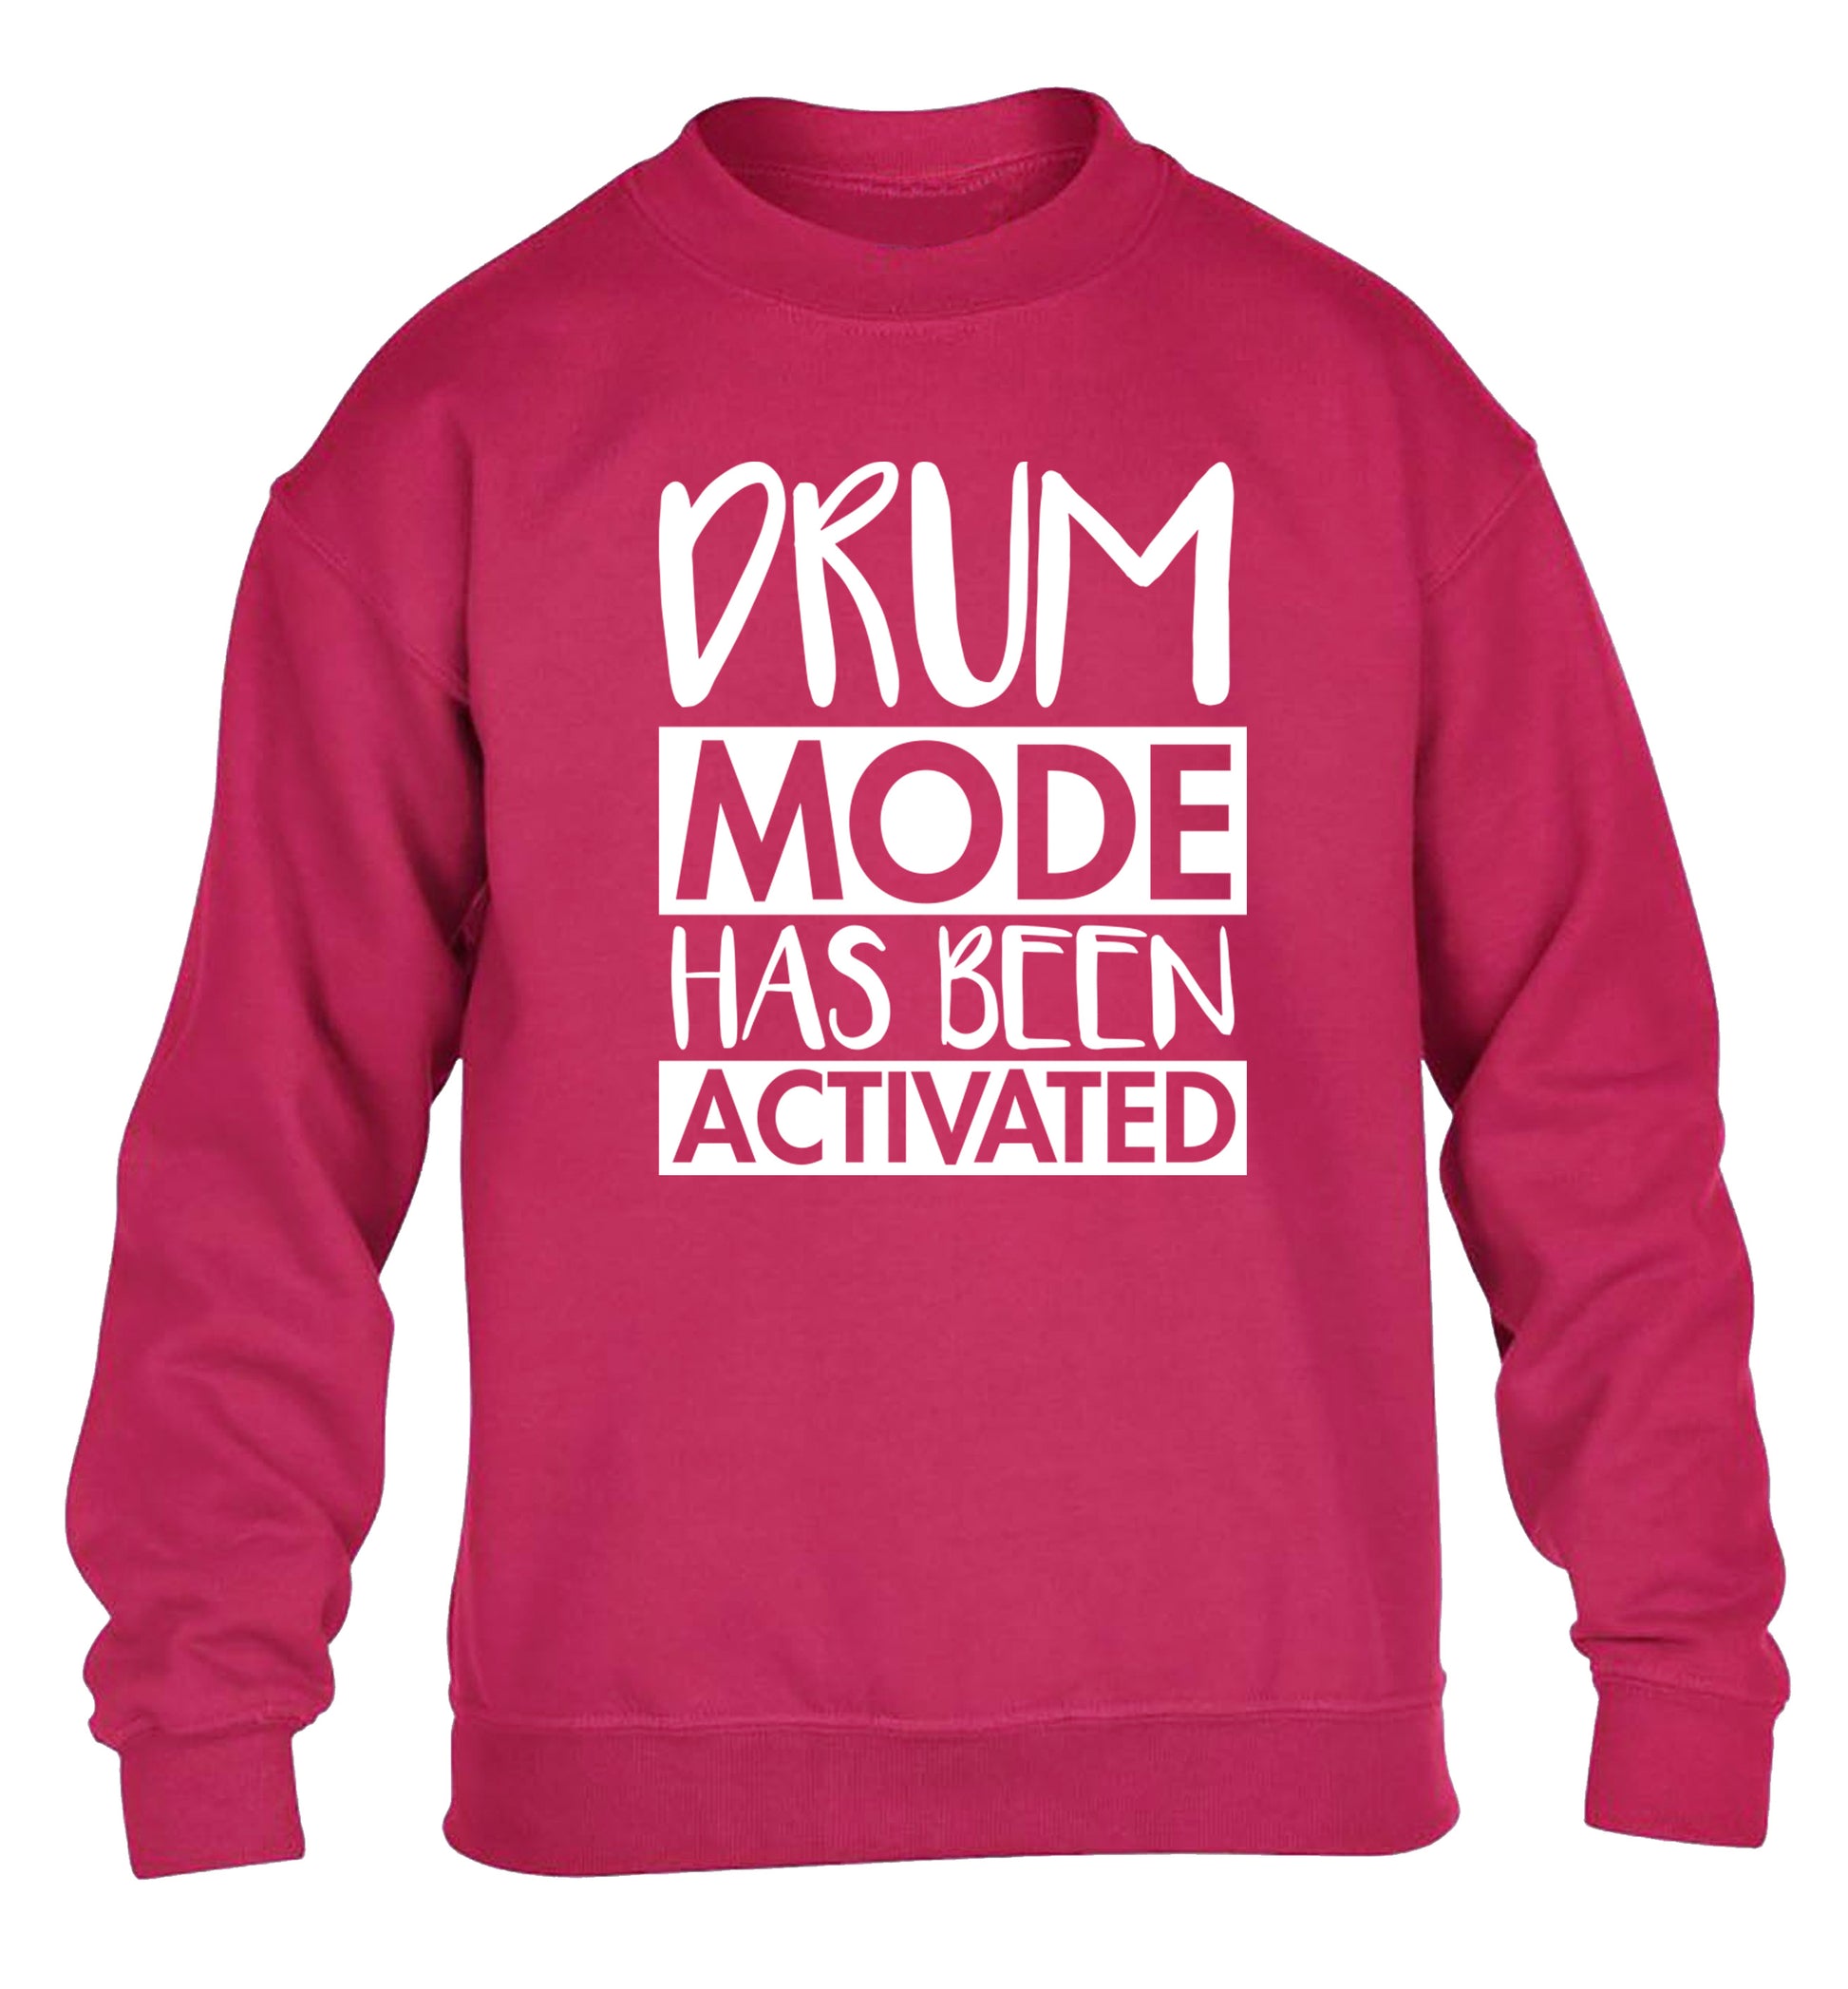 Drum mode activated children's pink sweater 12-14 Years